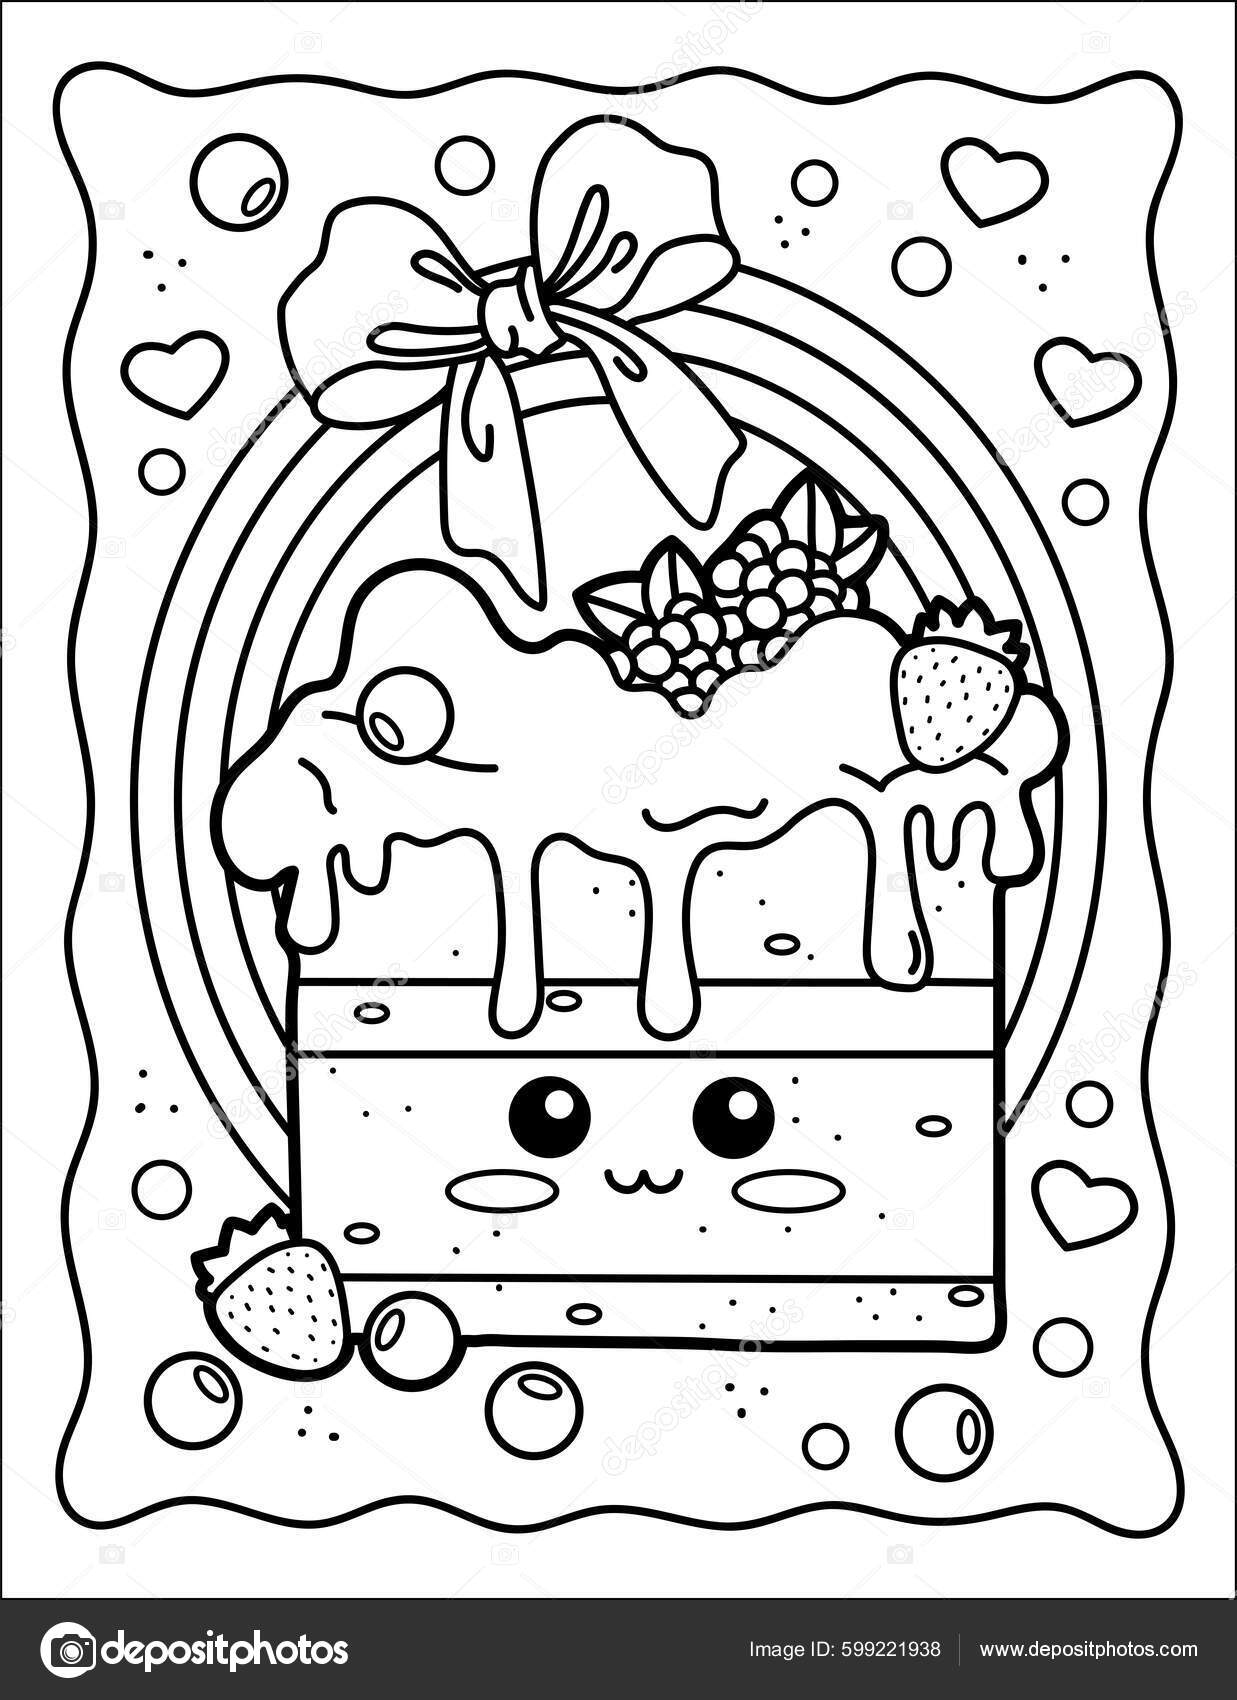 Coloring: Printable E-Books, Published Adult Coloring Books and a Coloring  Calendar — Art is Fun